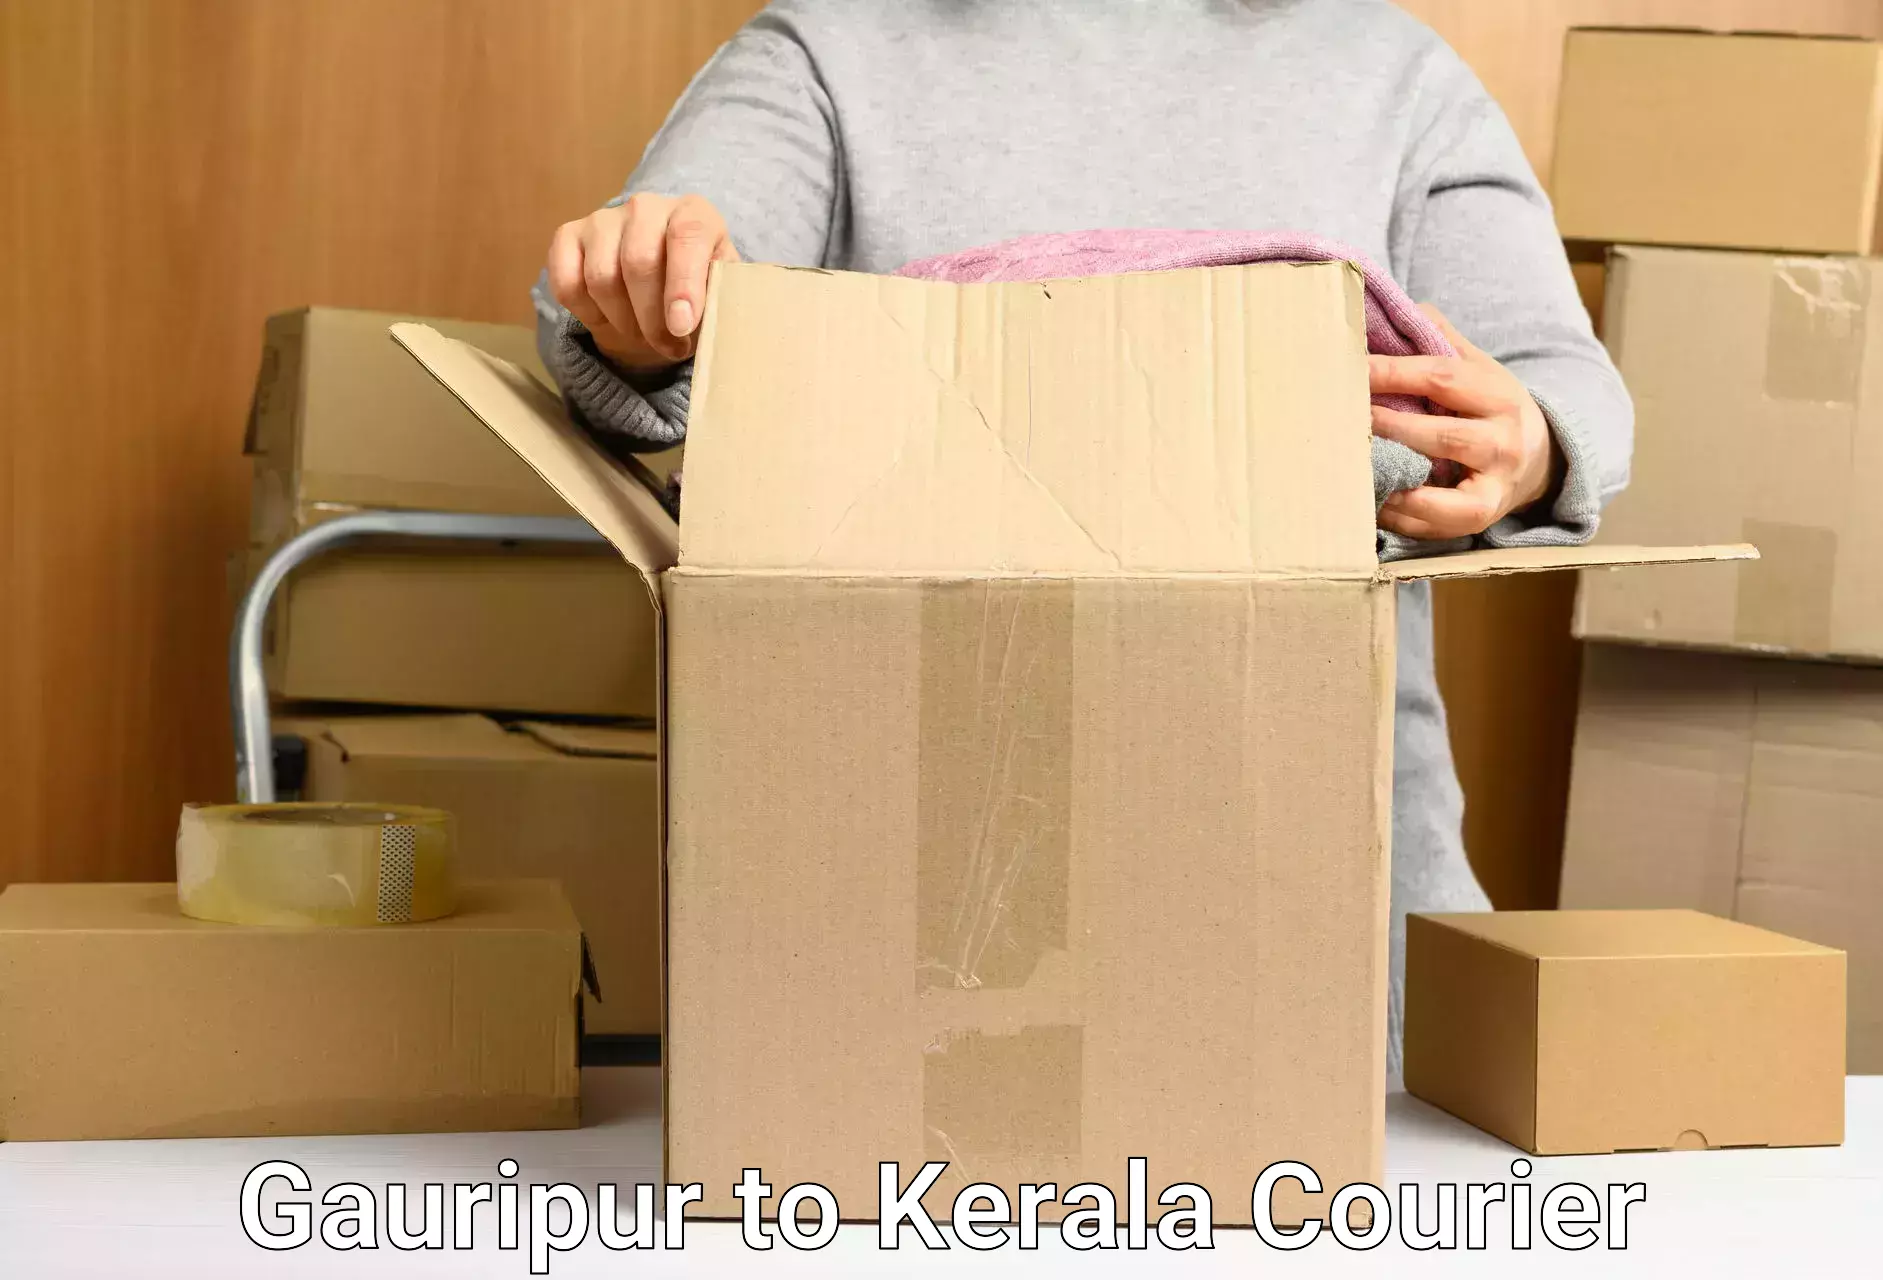 Full-service courier options Gauripur to Edavanna